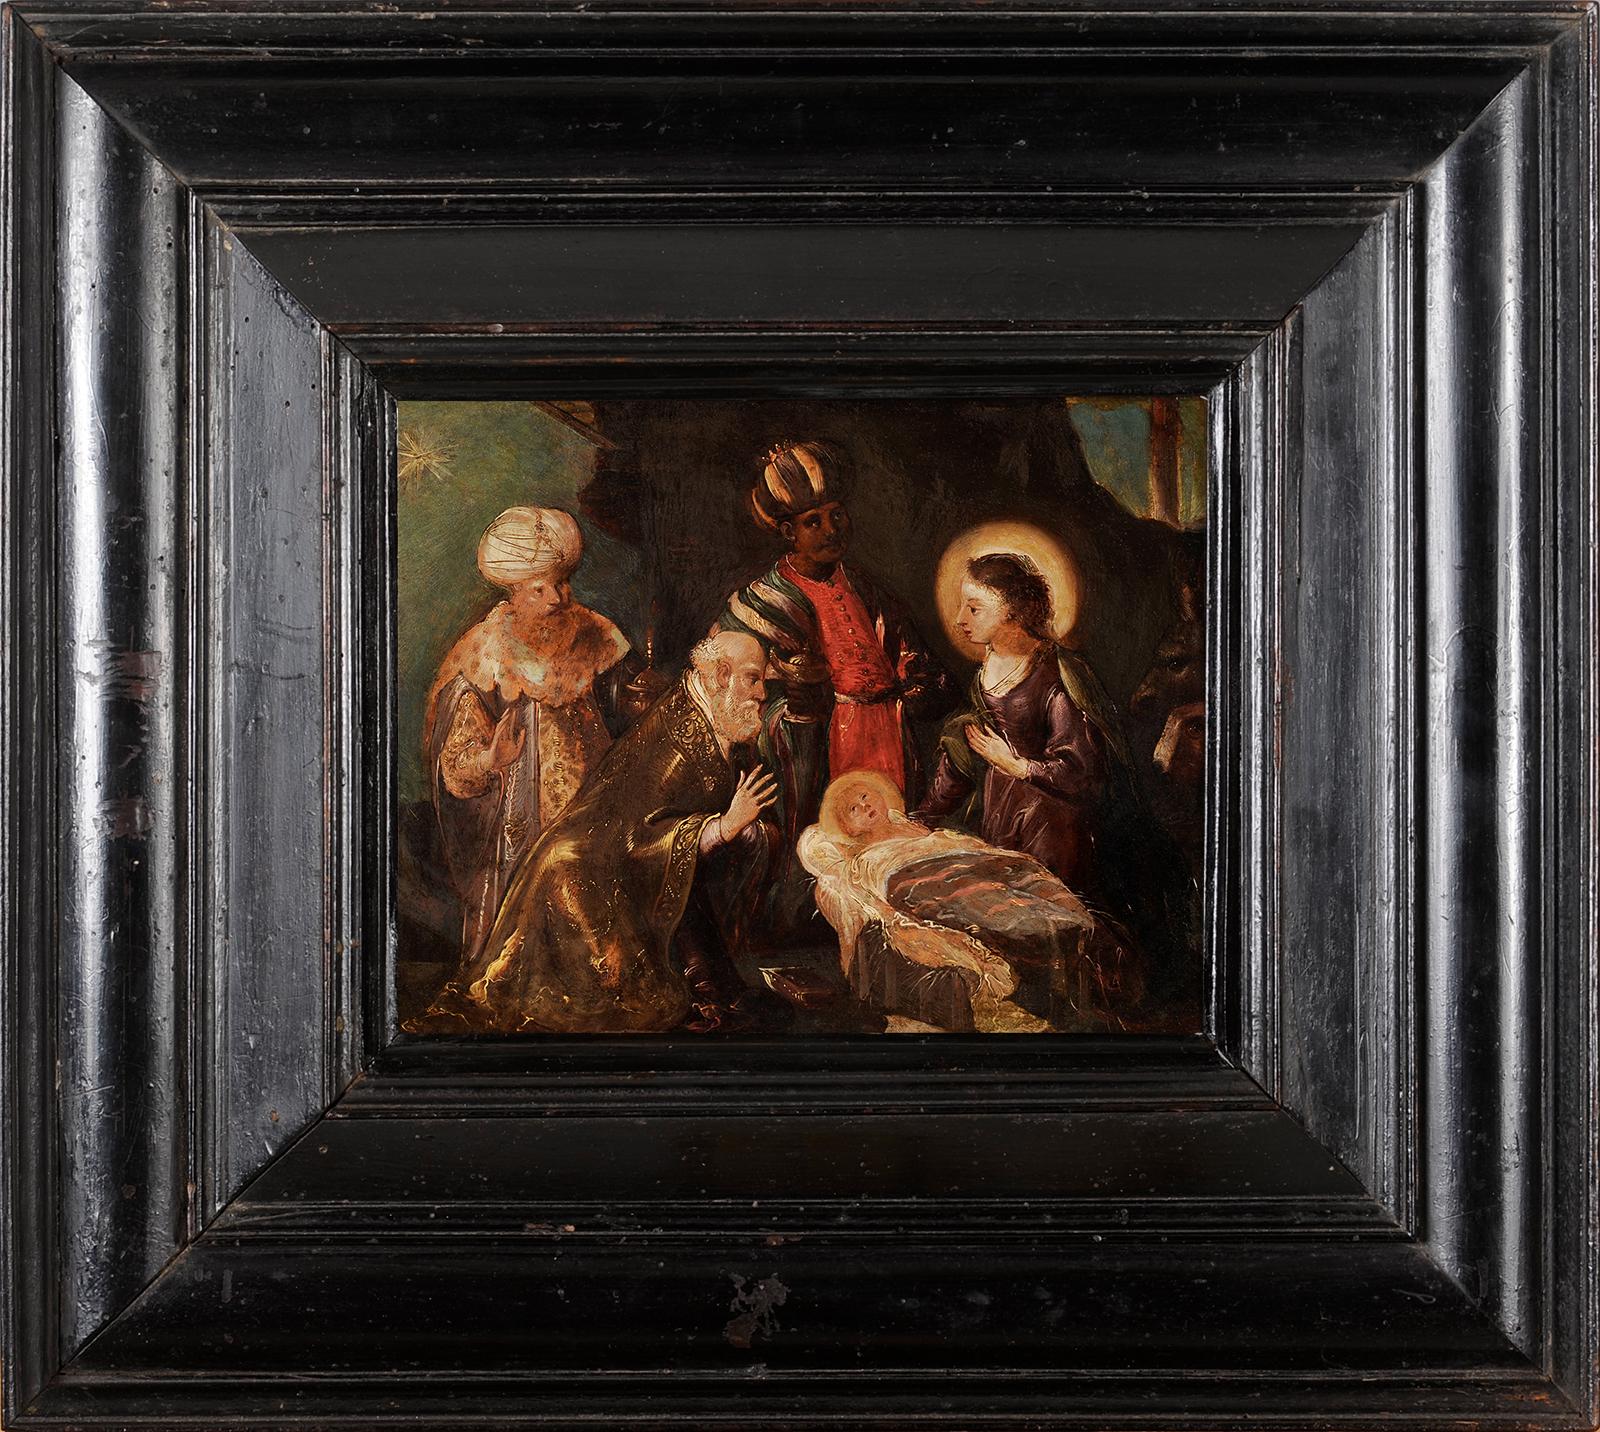 German school circa 1600 - Adoration of the Magi - Painting by Unknown